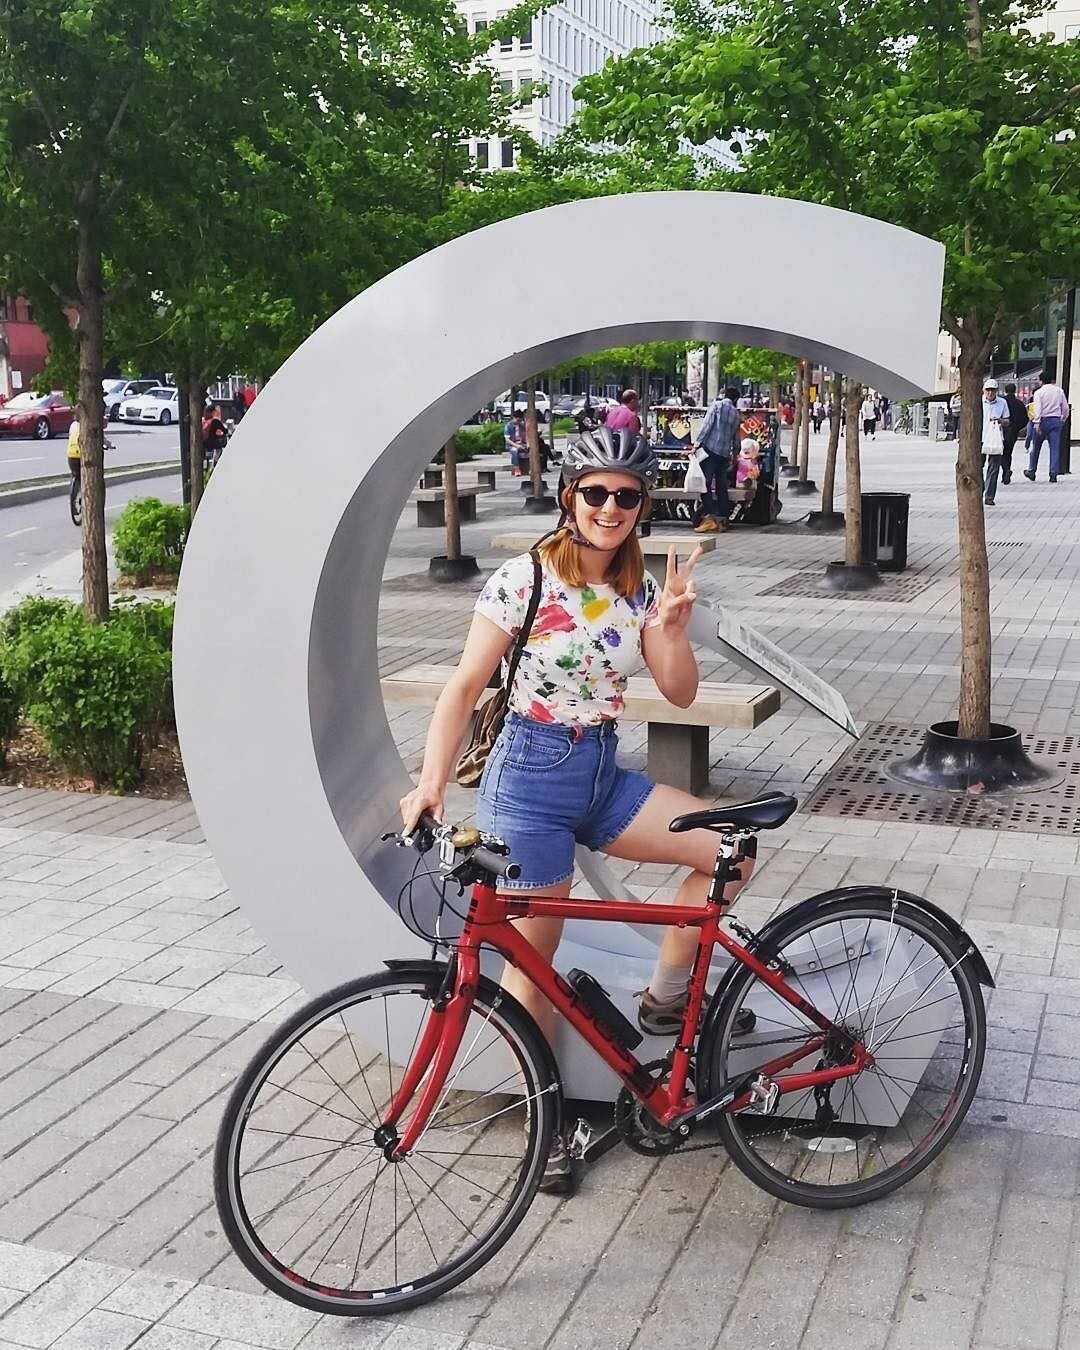 A smiling young woman poses with her bike in front of Concordia's letter C logo sculpture